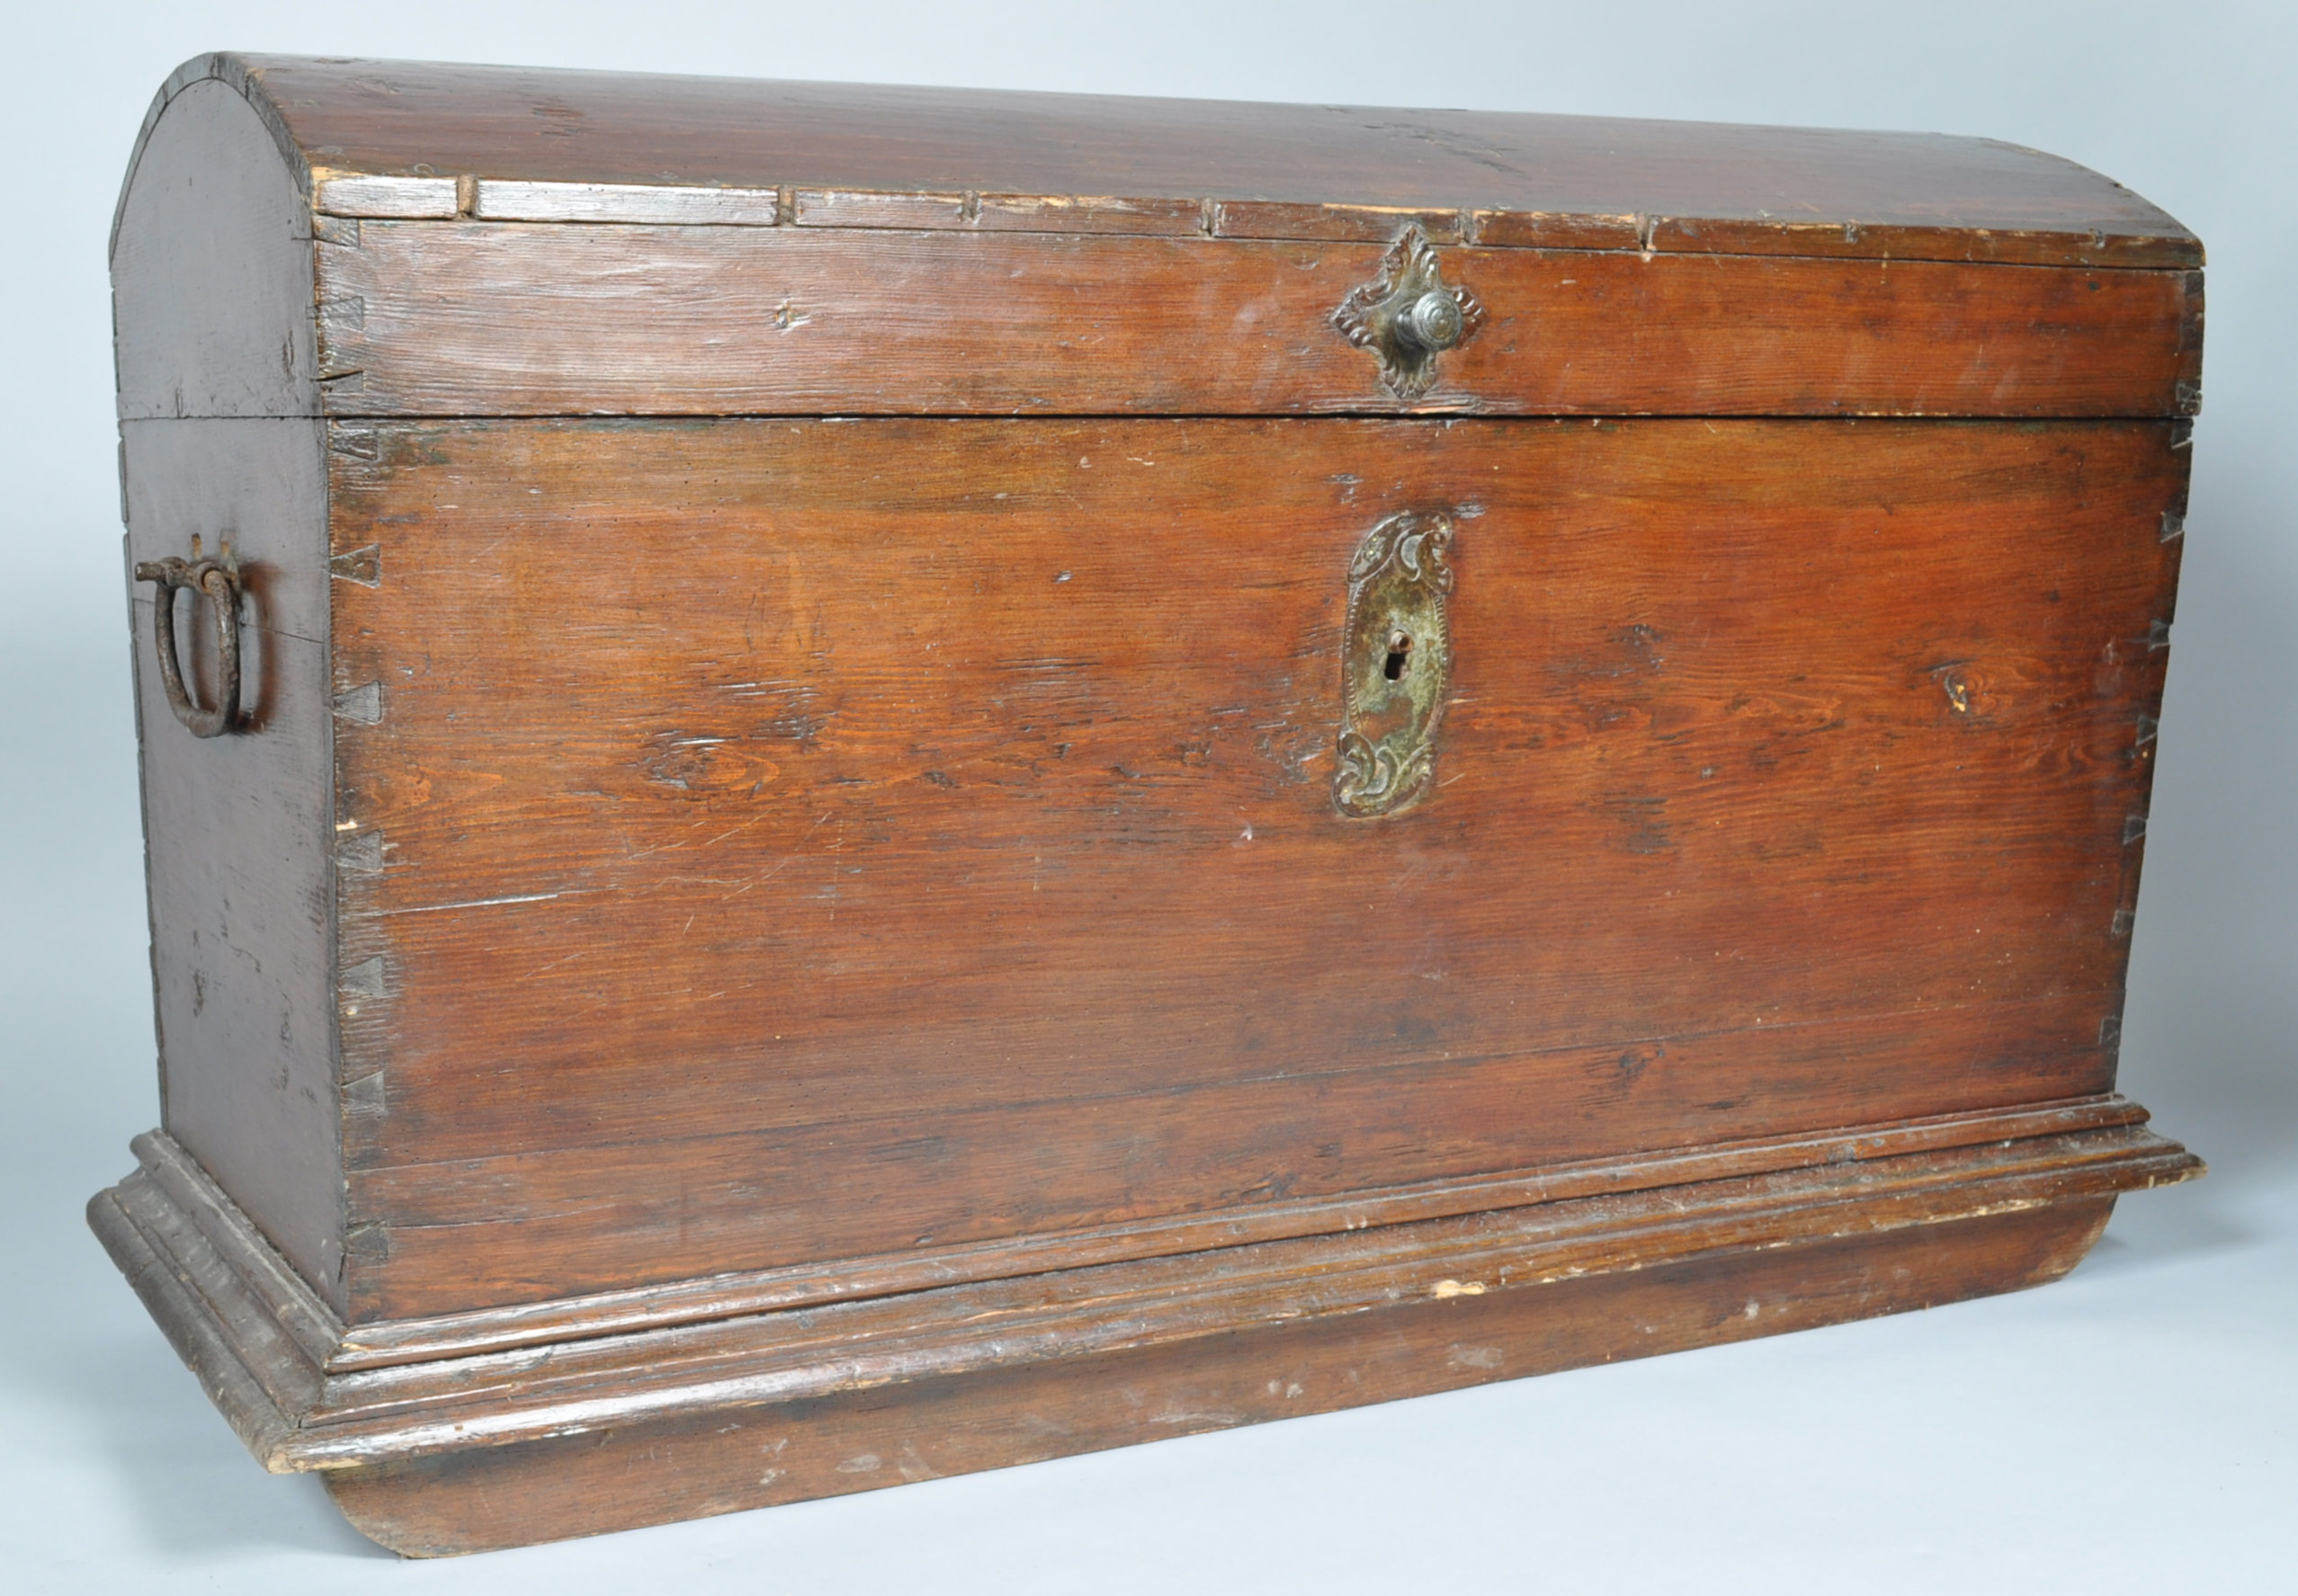 A 19th century Continental domed trunk, later stained,